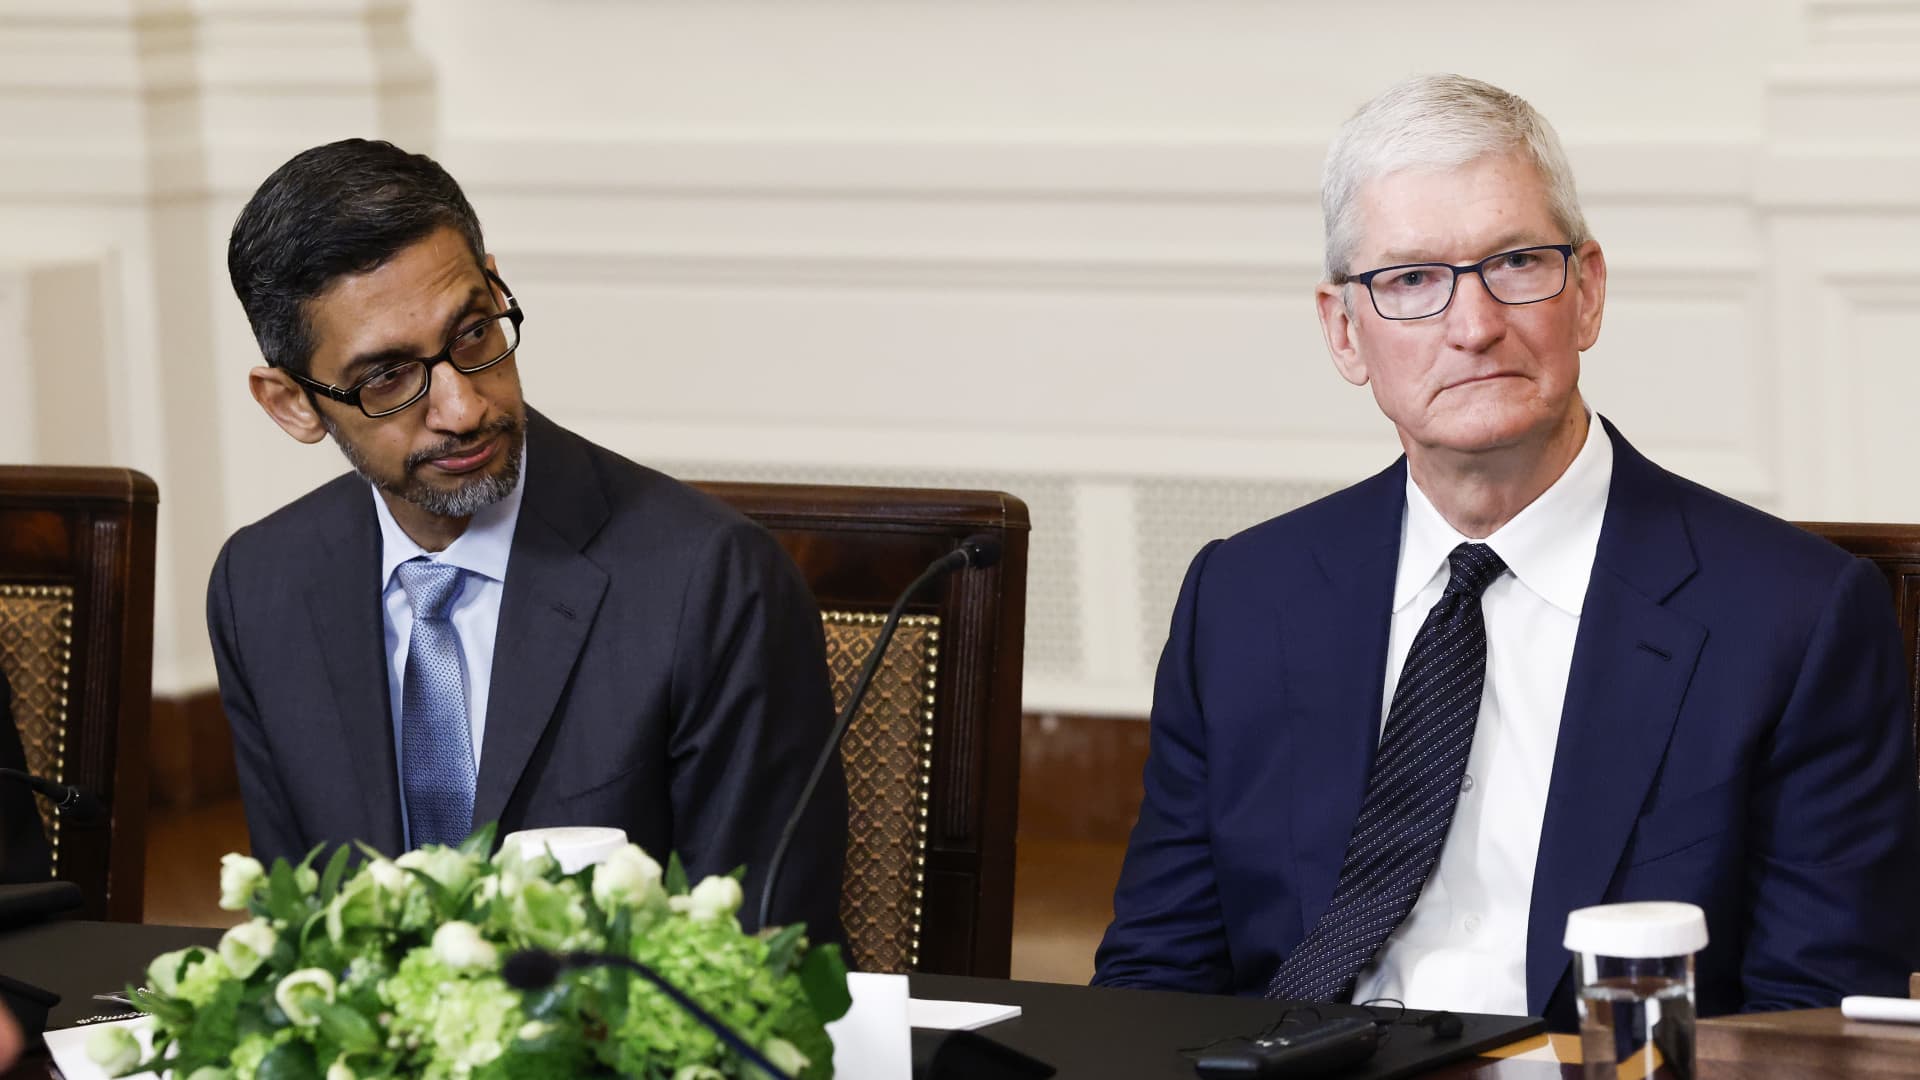 Governments spying on Apple and Google users through phone notifications, U.S. senator says 